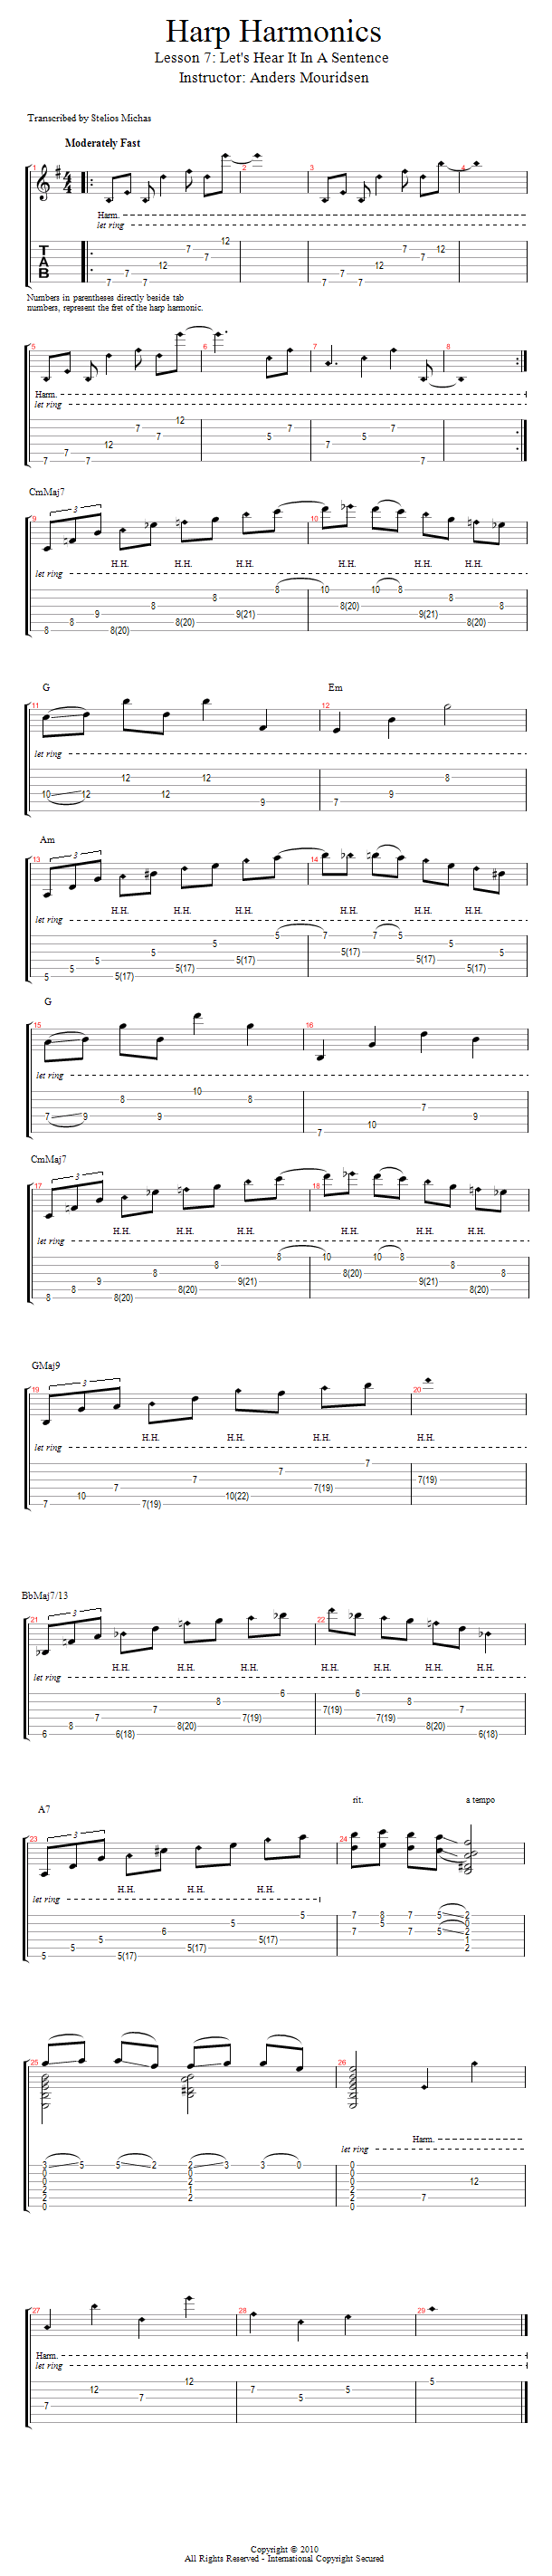 Let's Hear It In A Sentence song notation